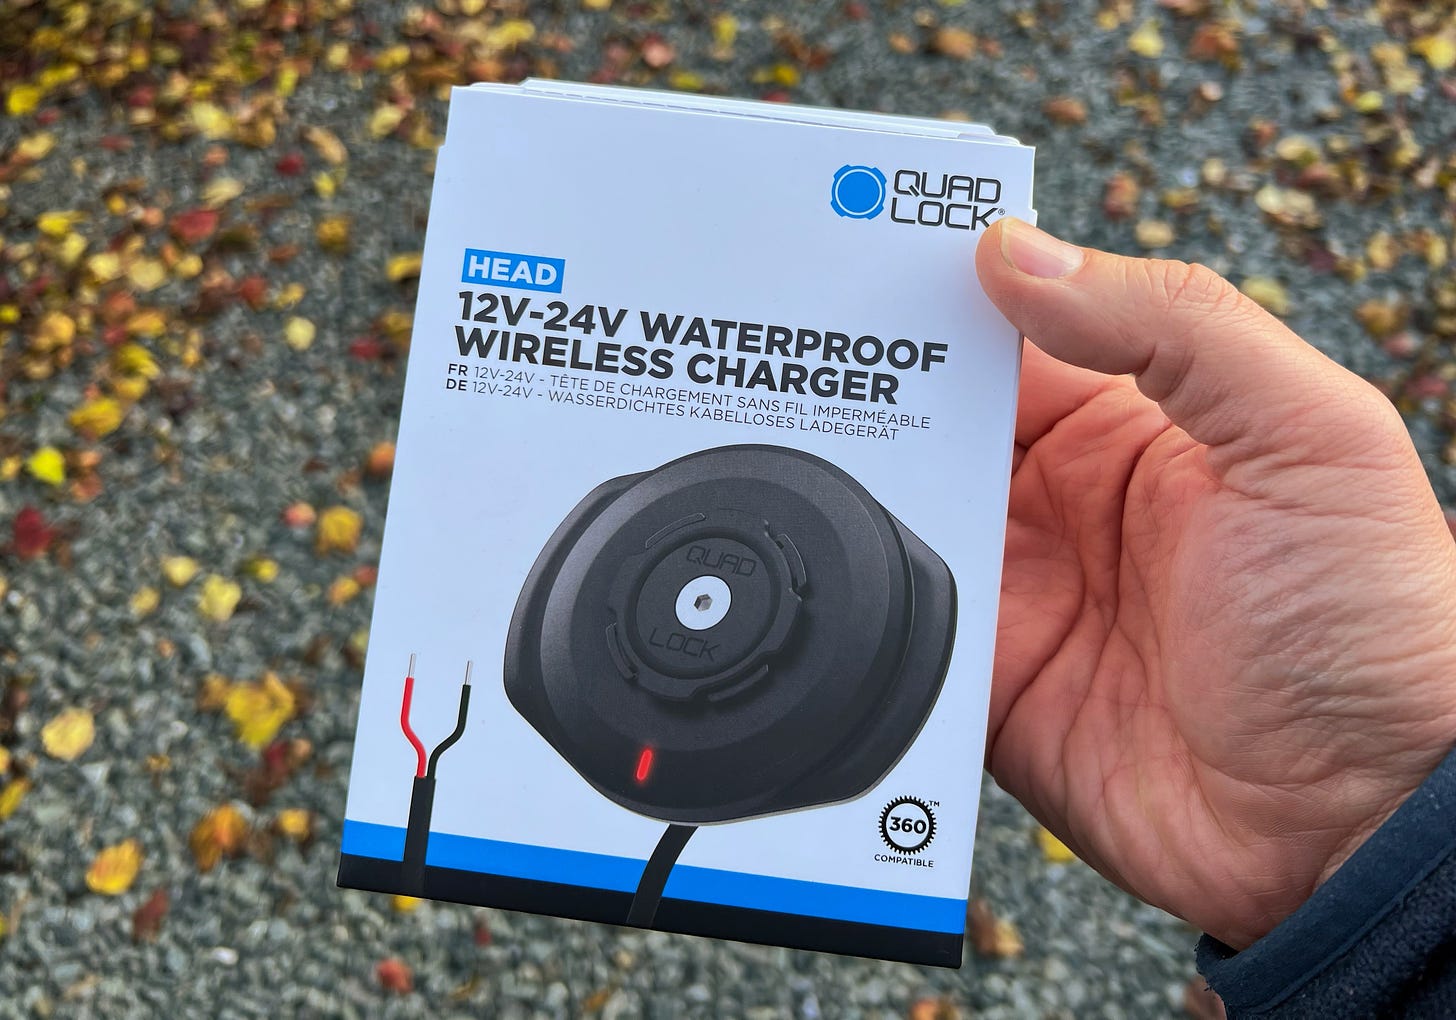 Me holding the box containing the waterproof wireless charger. There are lots of fallen leaves on the ground that I really should clean up.